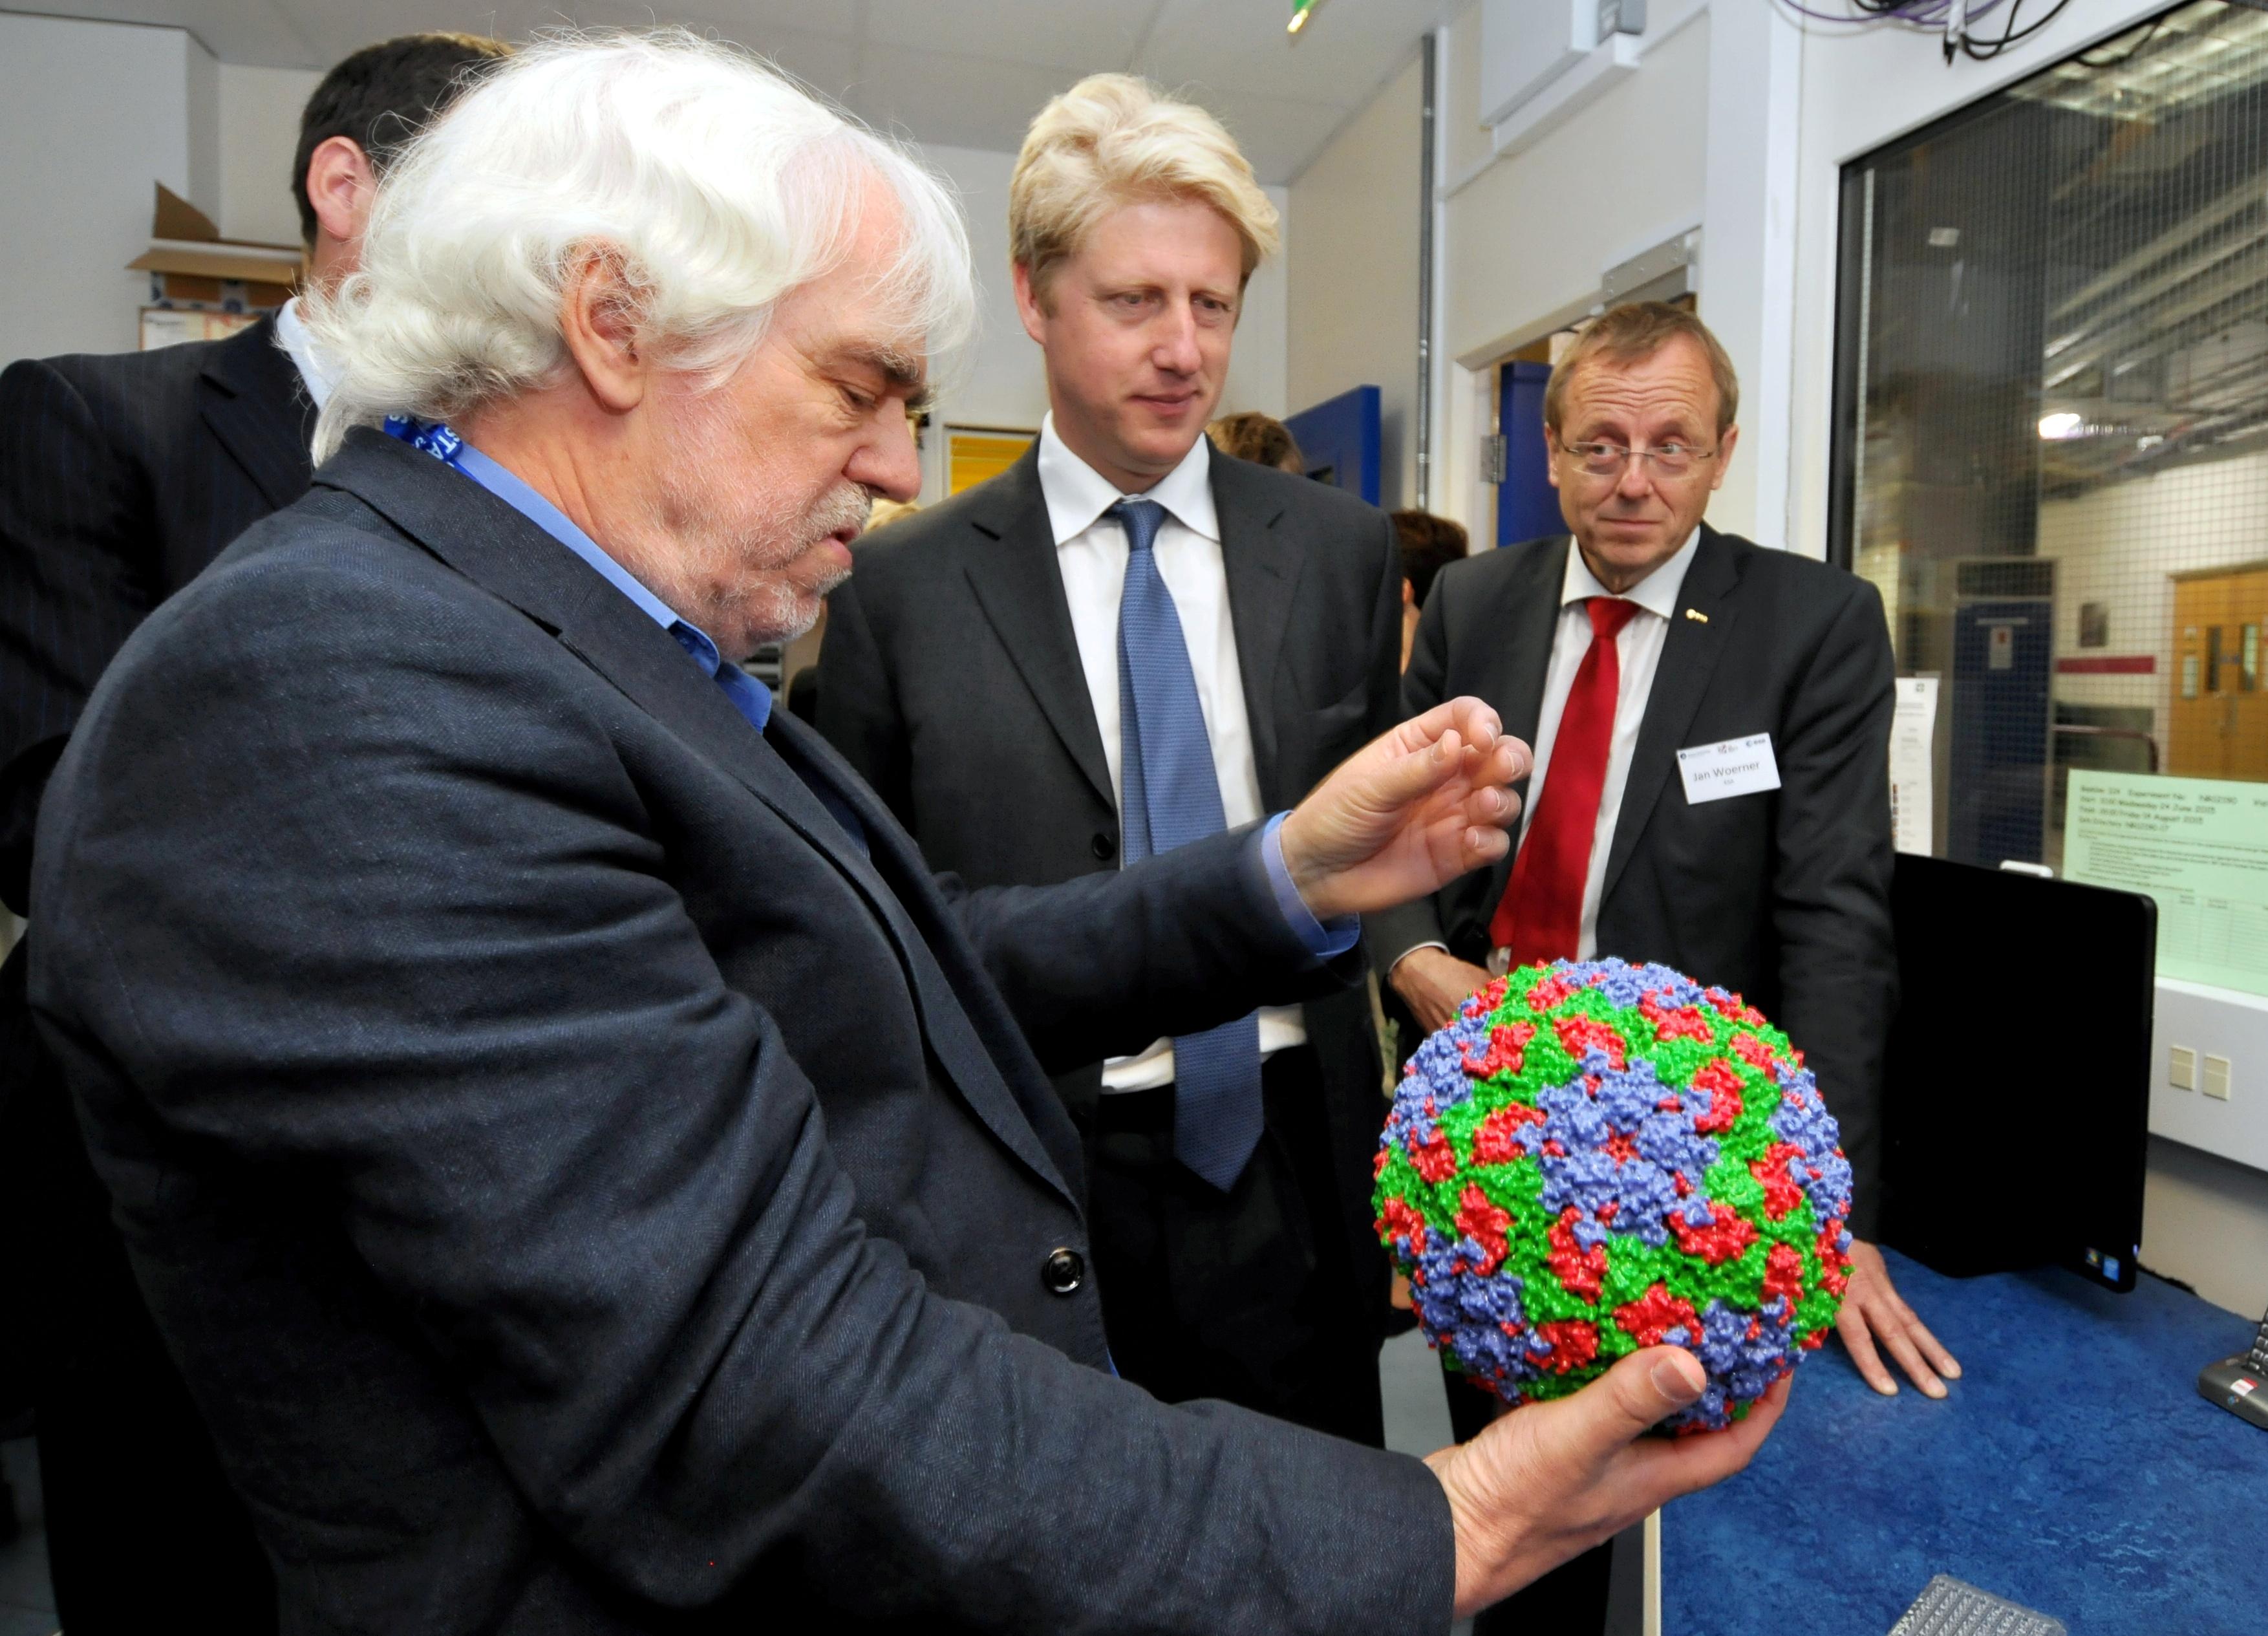 Visit by Minister of State Universities and Science, Jo Johnson MP.
<br/>(L-R): Dave Stuart, Director of life science, Jo Johnson MP and Johann-Dietrich Woerner, the Director General of ESA